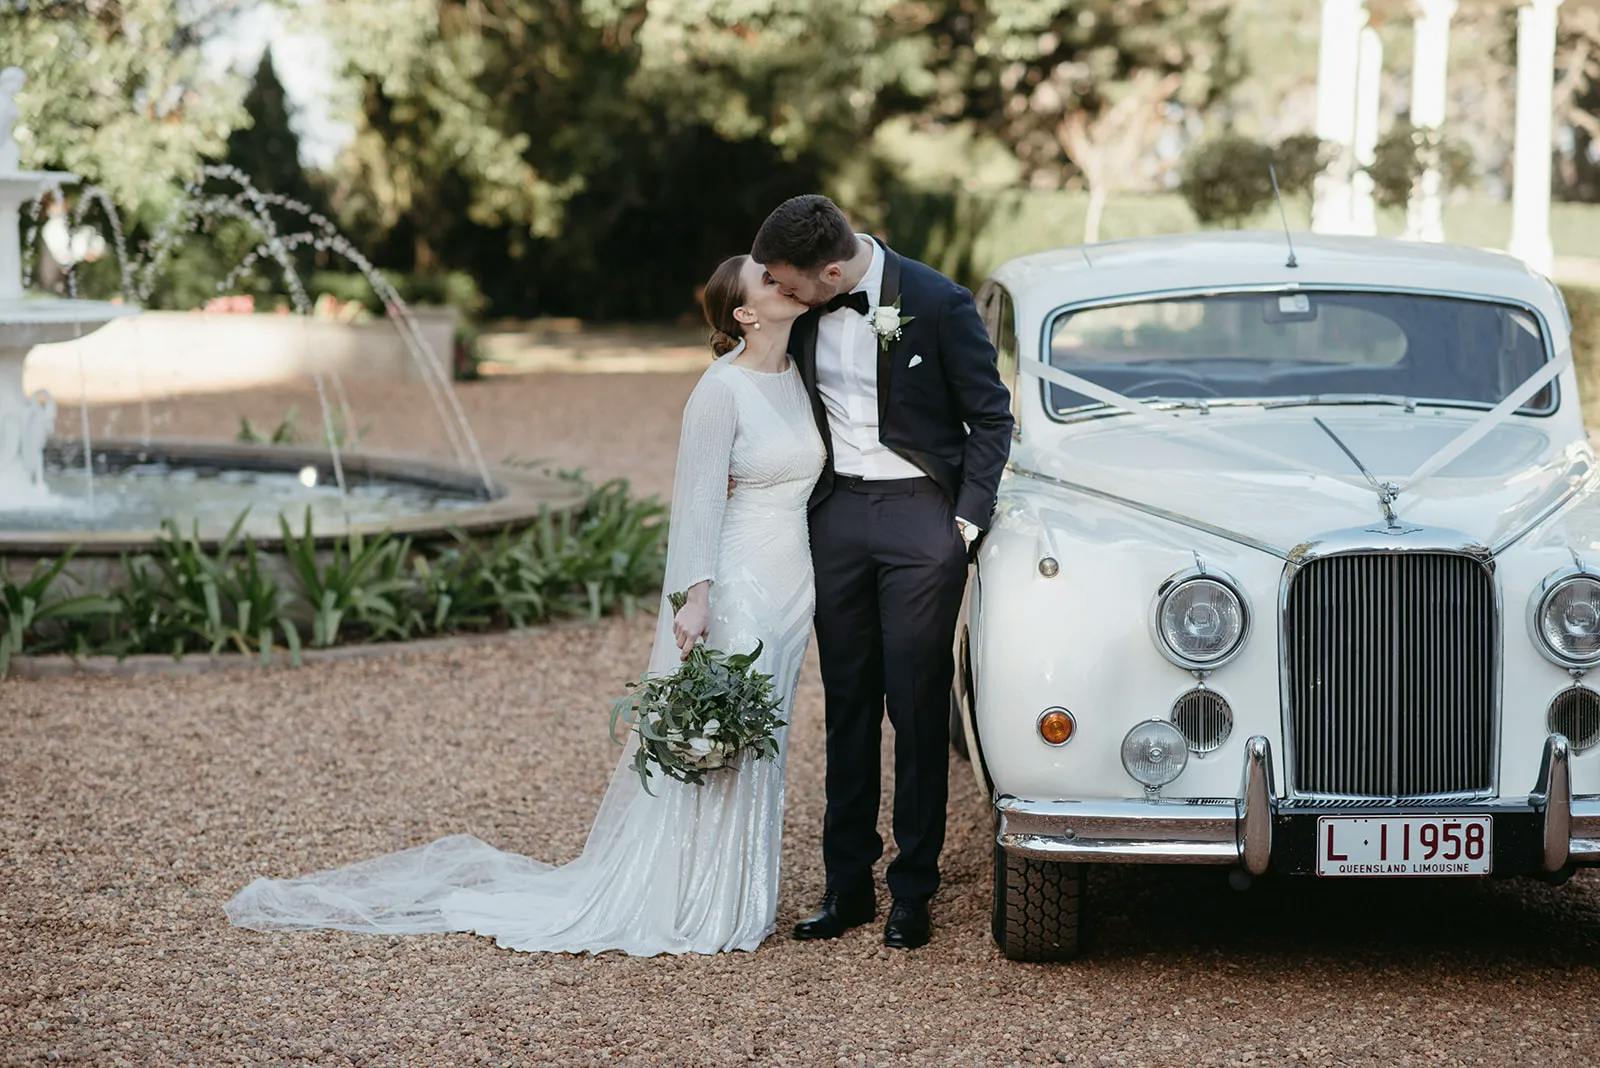 A bride in a white dress and a groom in a black suit share a kiss in front of a classic white car with a "L - 1958" license plate. They stand on a gravel path with a fountain and greenery in the background. The bride holds a bouquet of green foliage.